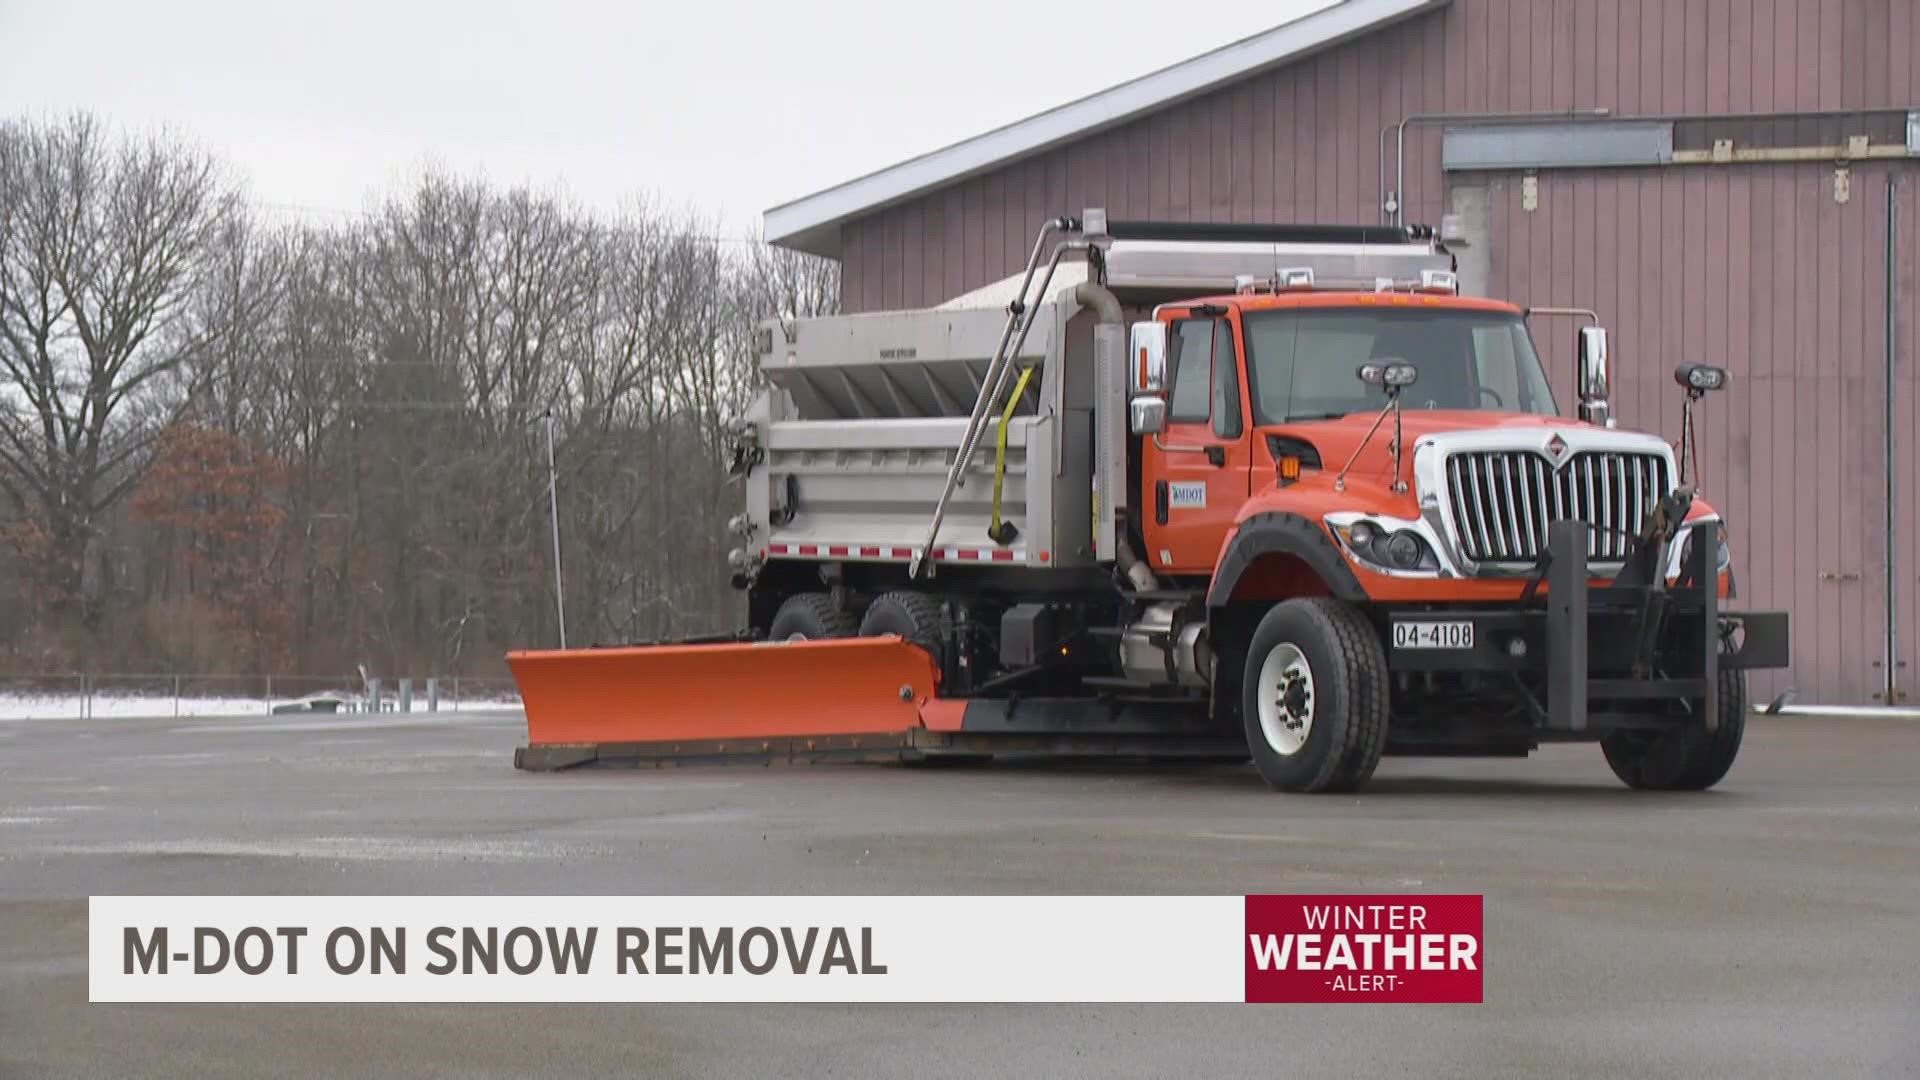 Drivers of snow plows and salt trucks will be working all night, trying to get ahead of the snow before the next round.